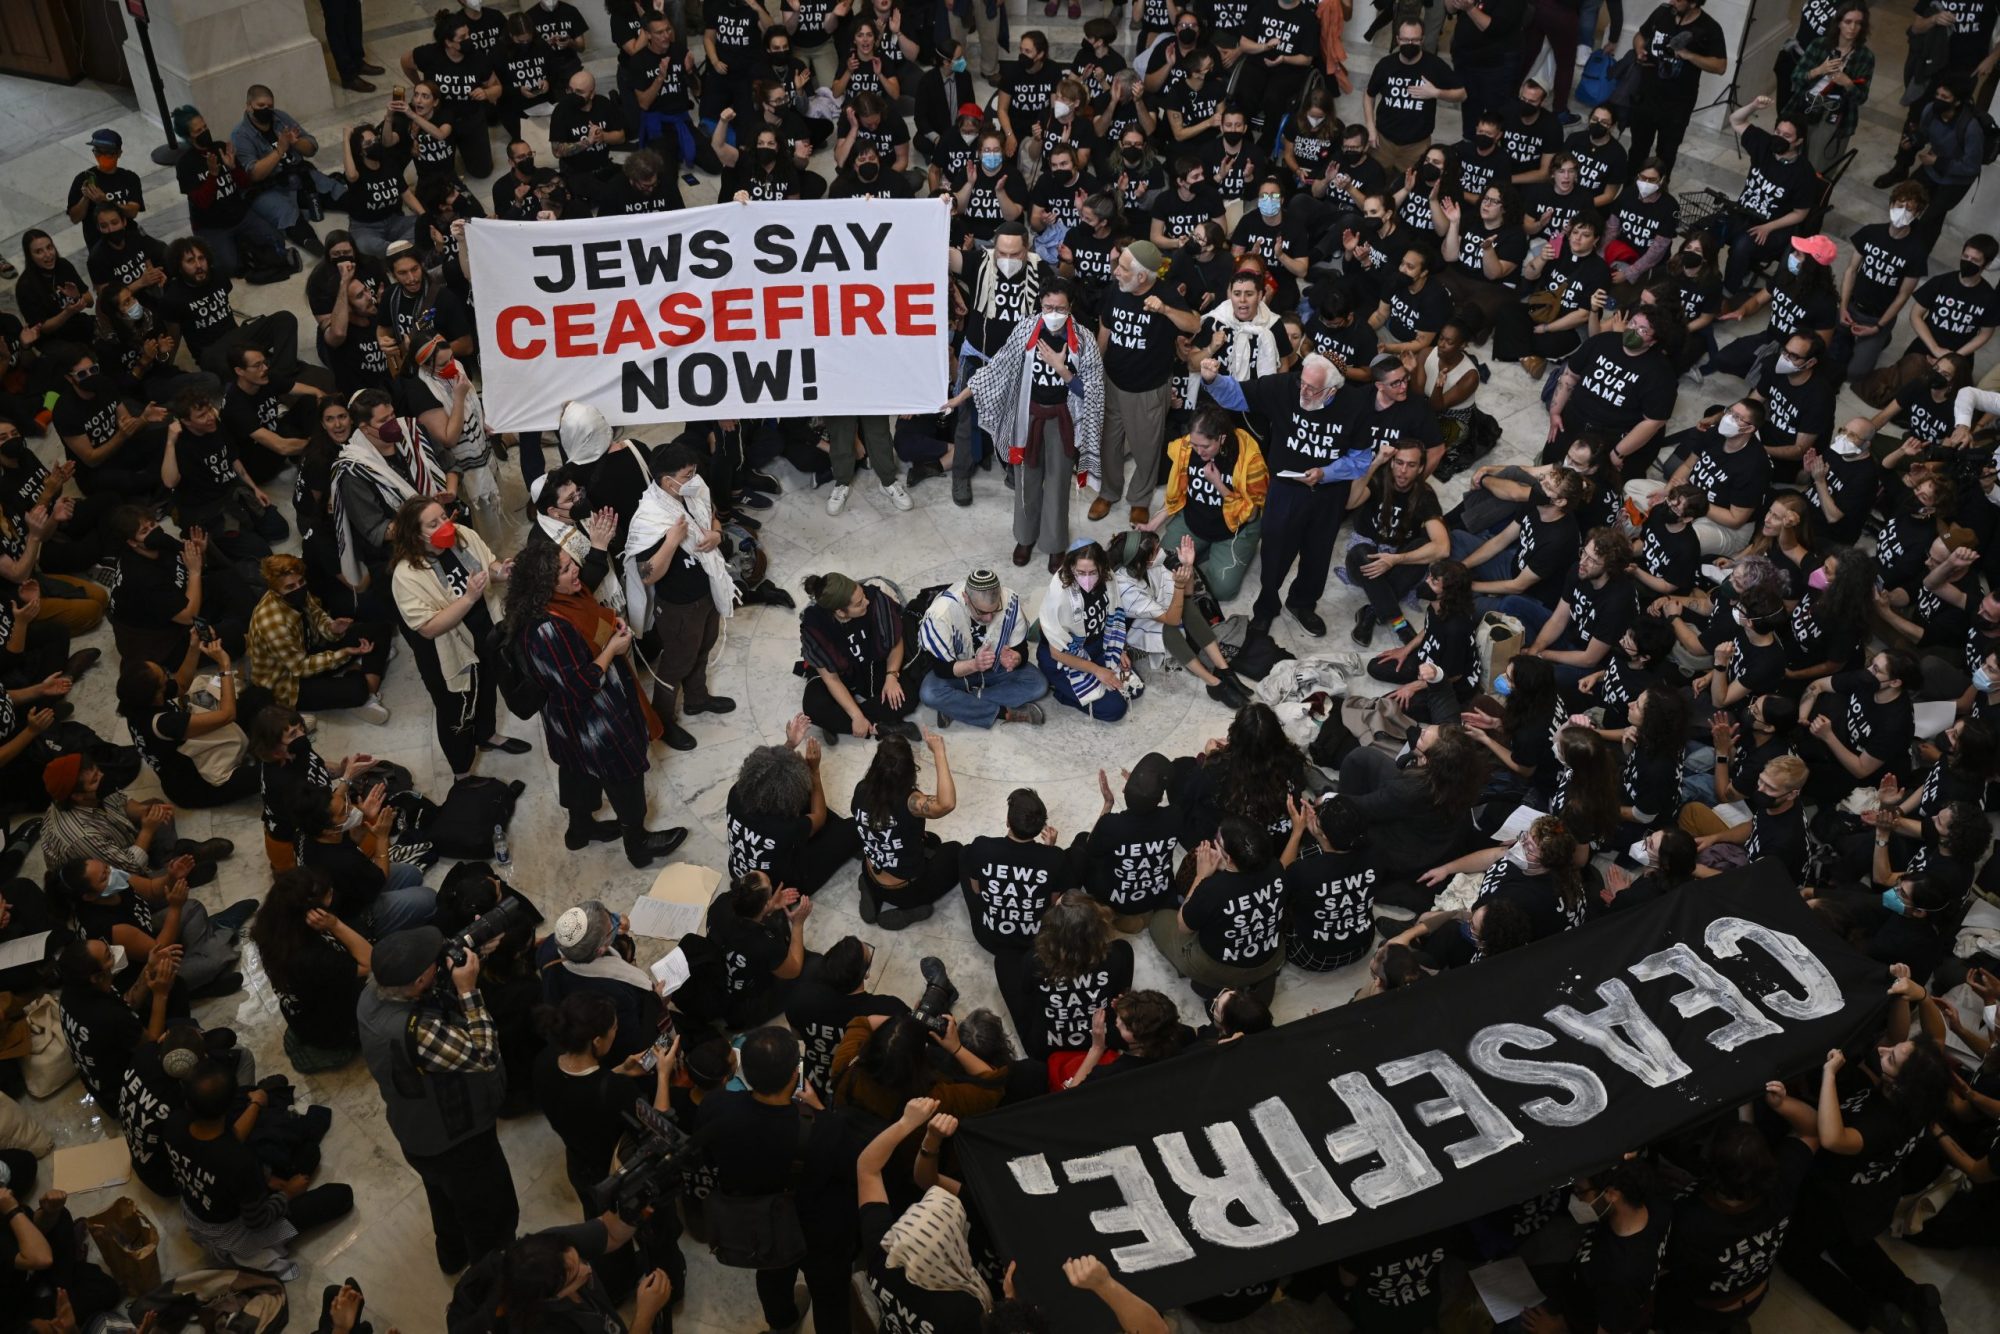 Police officers take a protester into custody as Jewish activists stage pro-Palestinian demonstration at United States Capitol building in Washington D.C., United States on October 18, 2023. Photo by Celal Gunes/Anadolu via Getty Images